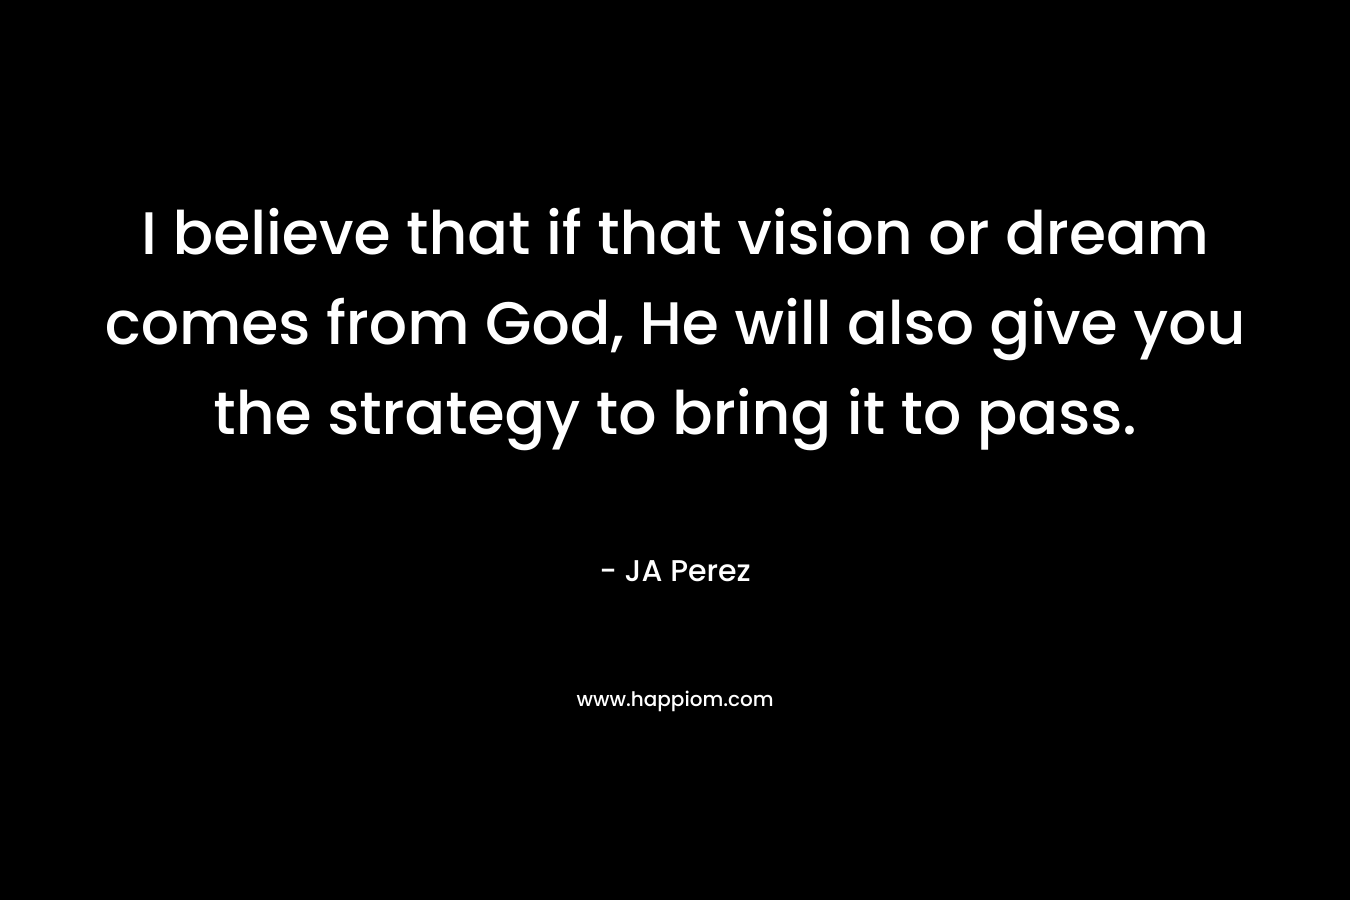 I believe that if that vision or dream comes from God, He will also give you the strategy to bring it to pass.